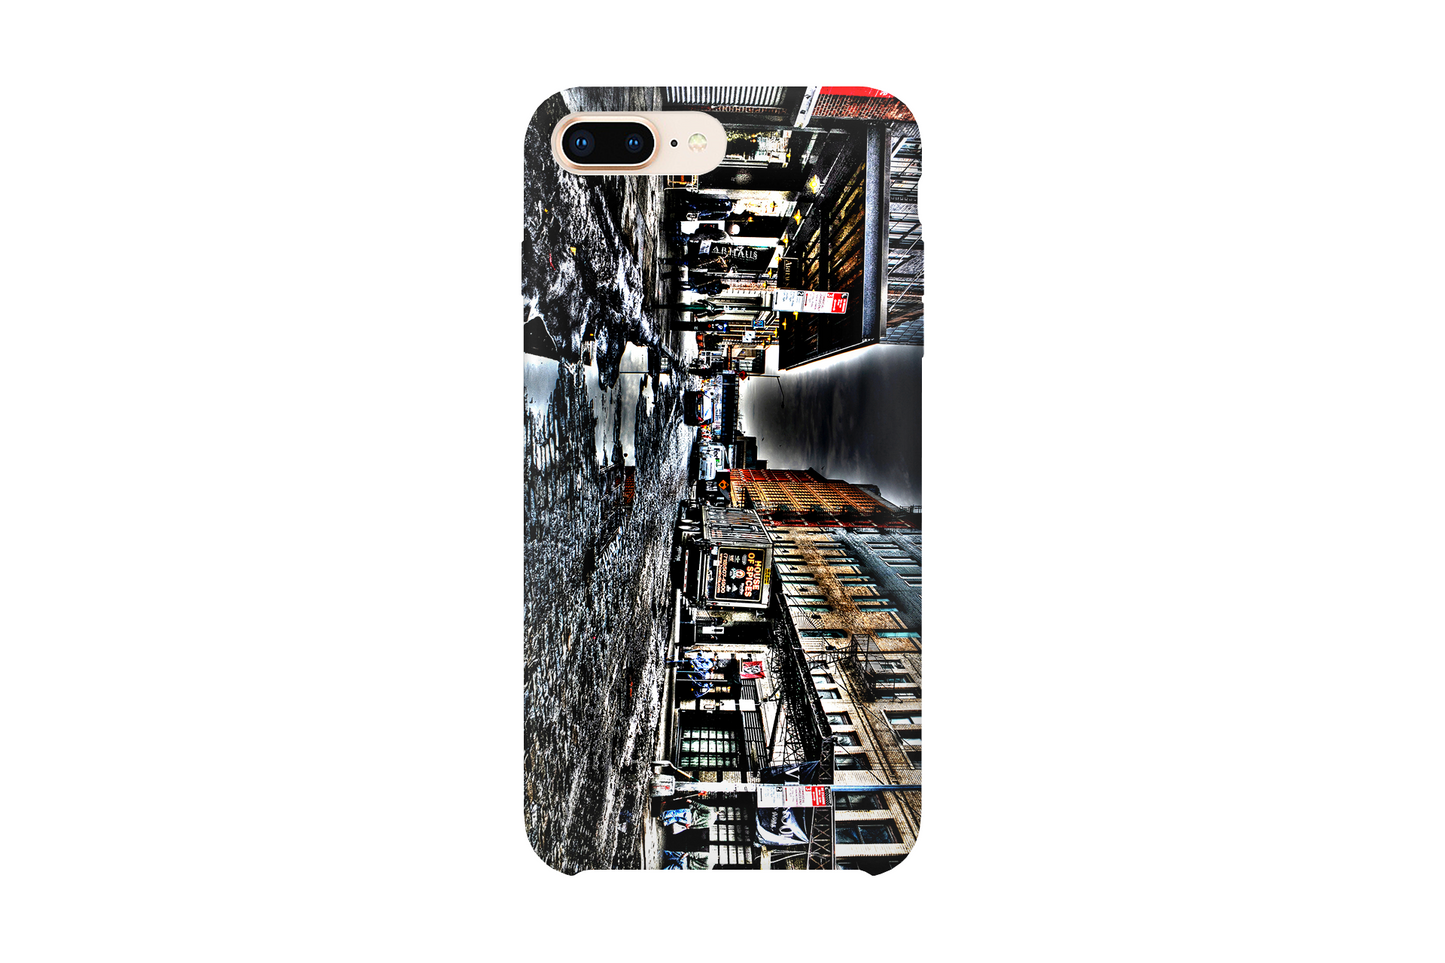 Meatpacking District iPhone case by Mike Lindwasser